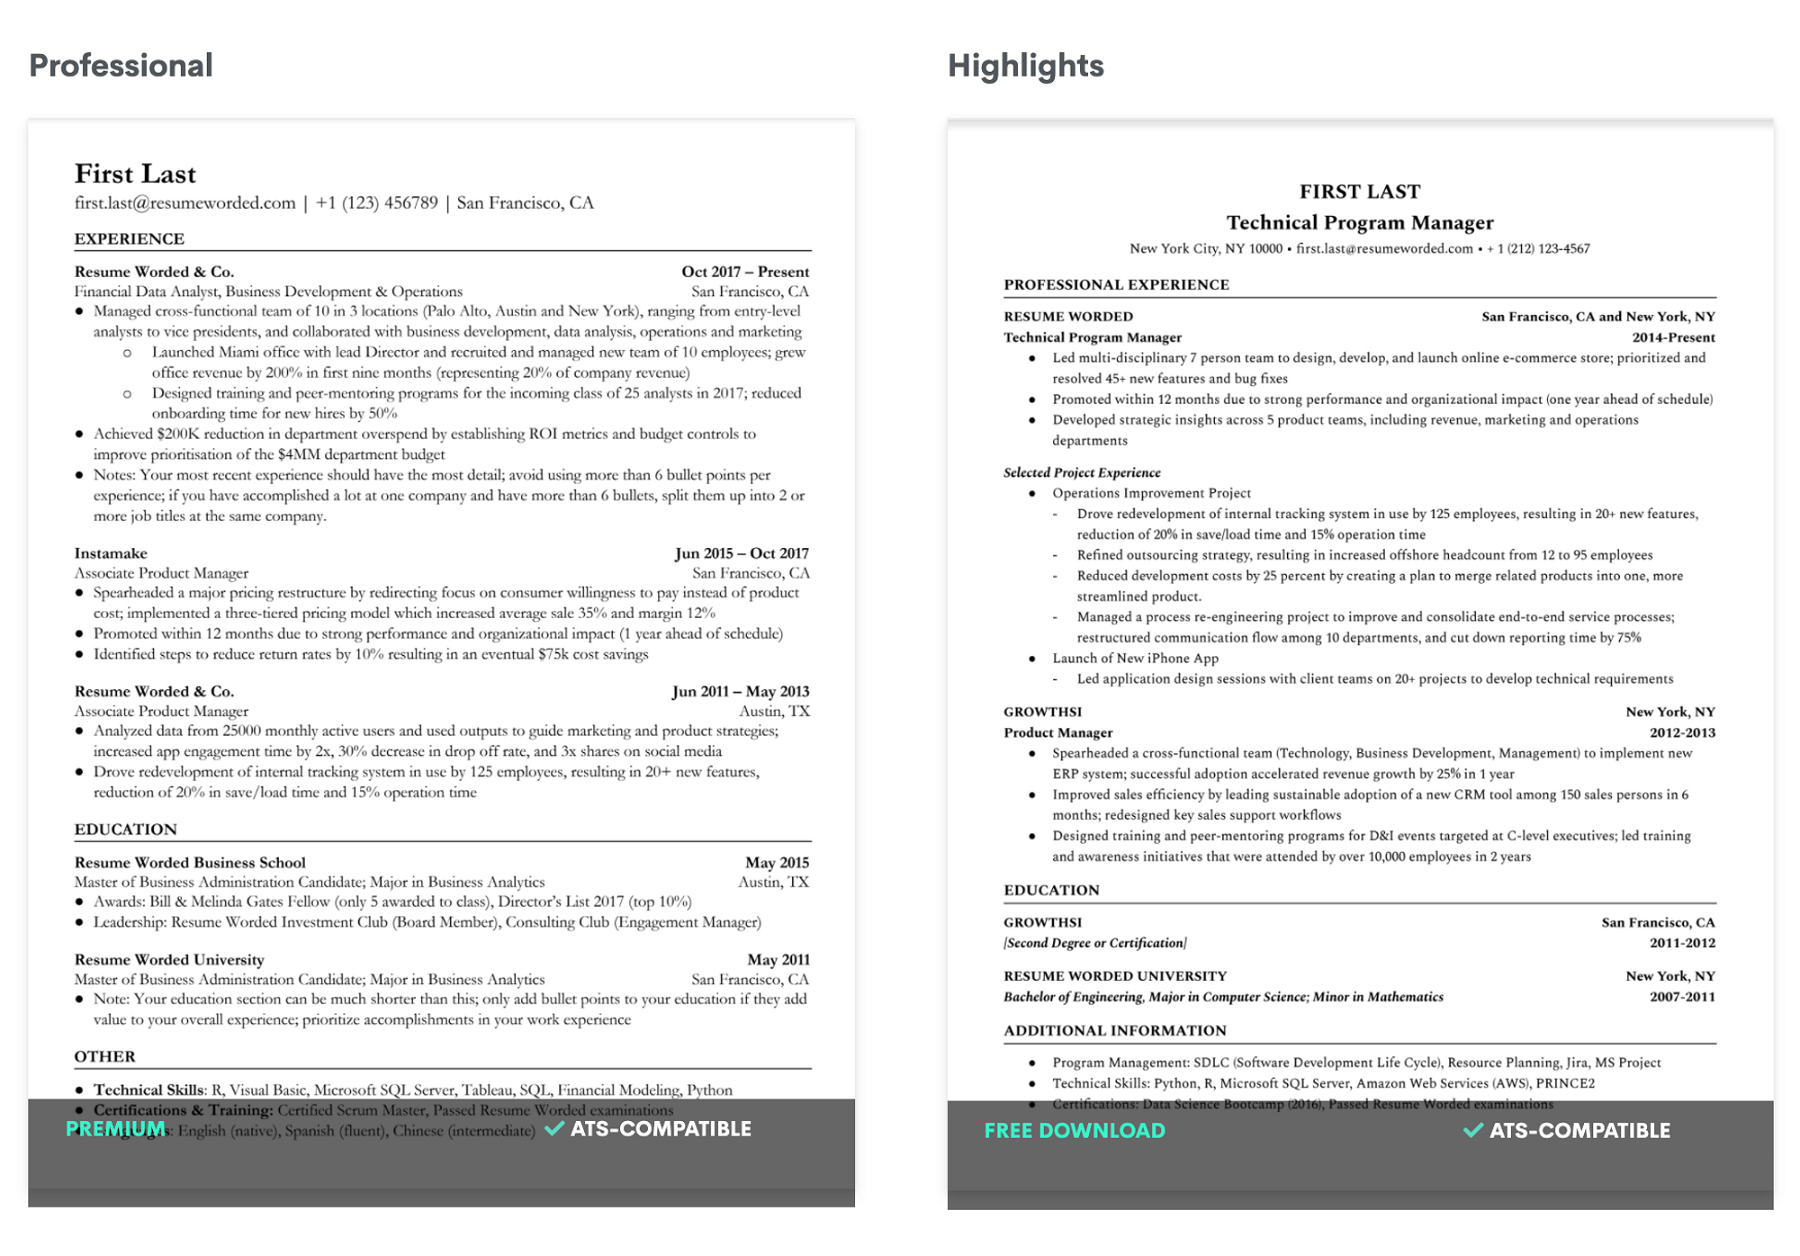 Wanting to know how simple resumes do a good job of passing the ATS - Feel free to download it from https://resumeworded.com/resume-templates